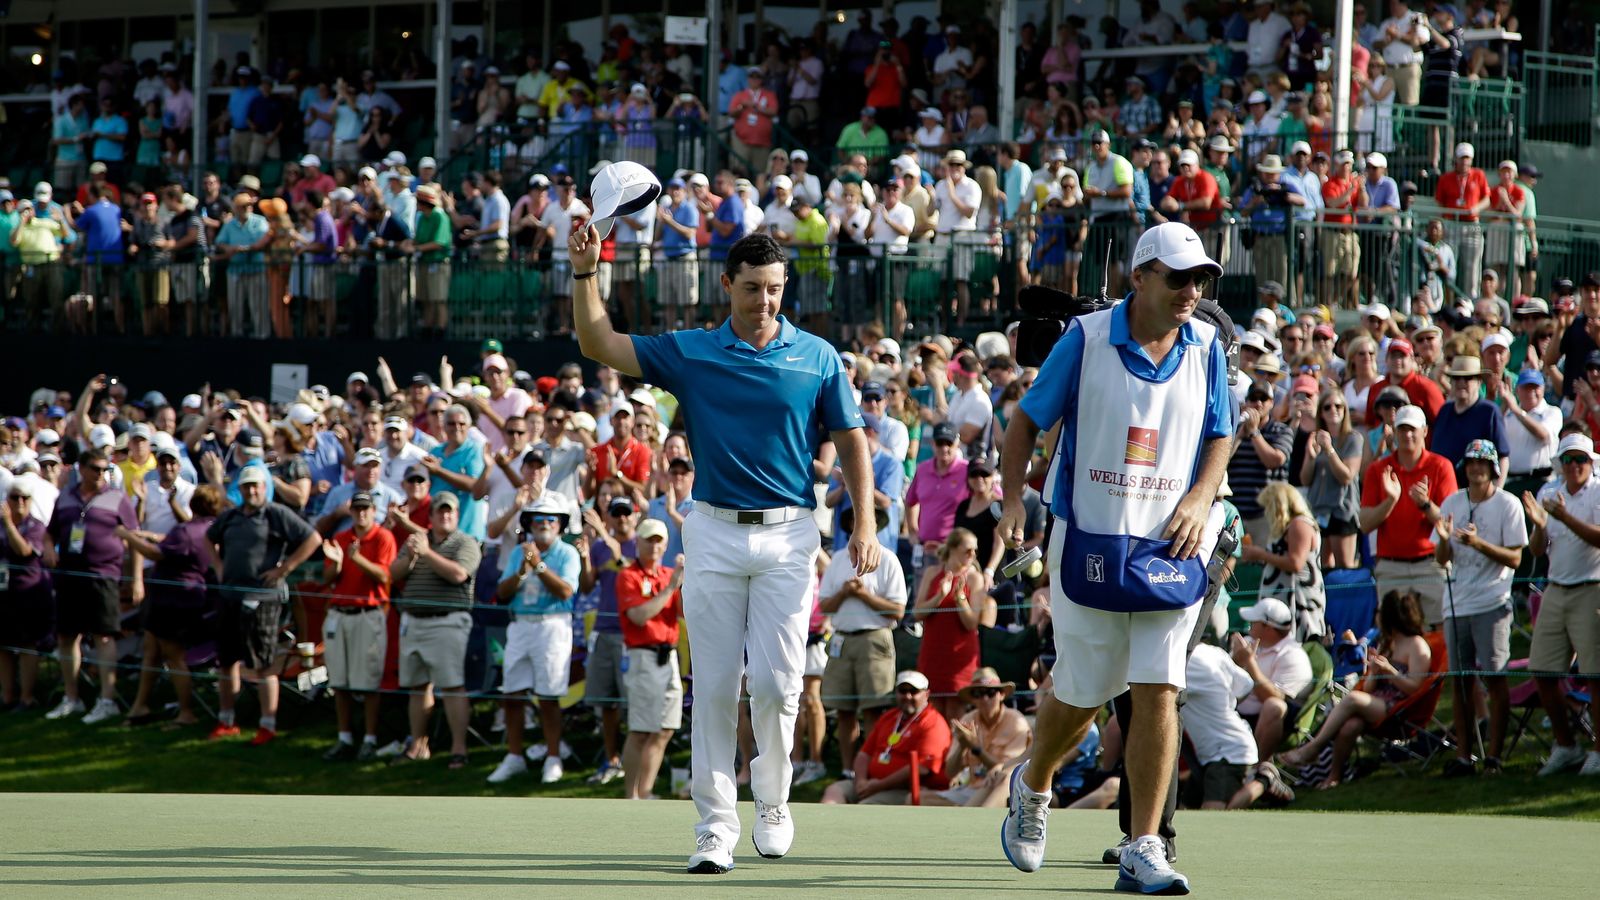 Rory McIlroy's Wells Fargo Championship victory revisited Golf News